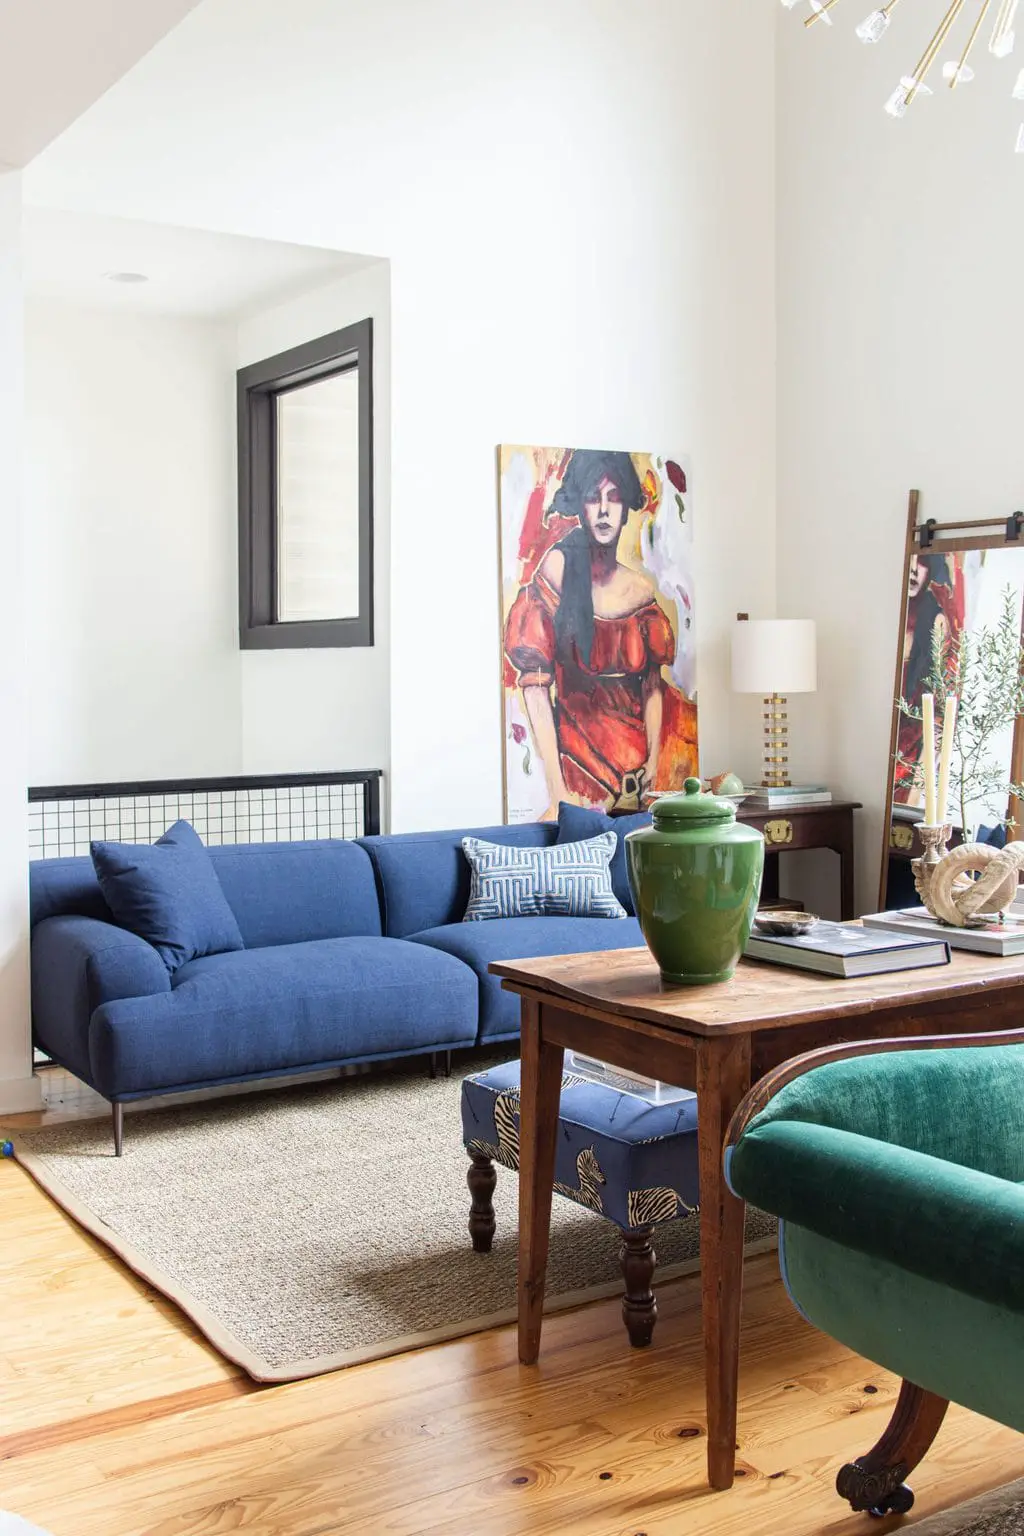 West Midtown Project: Article Abisko Sofa and Armchair